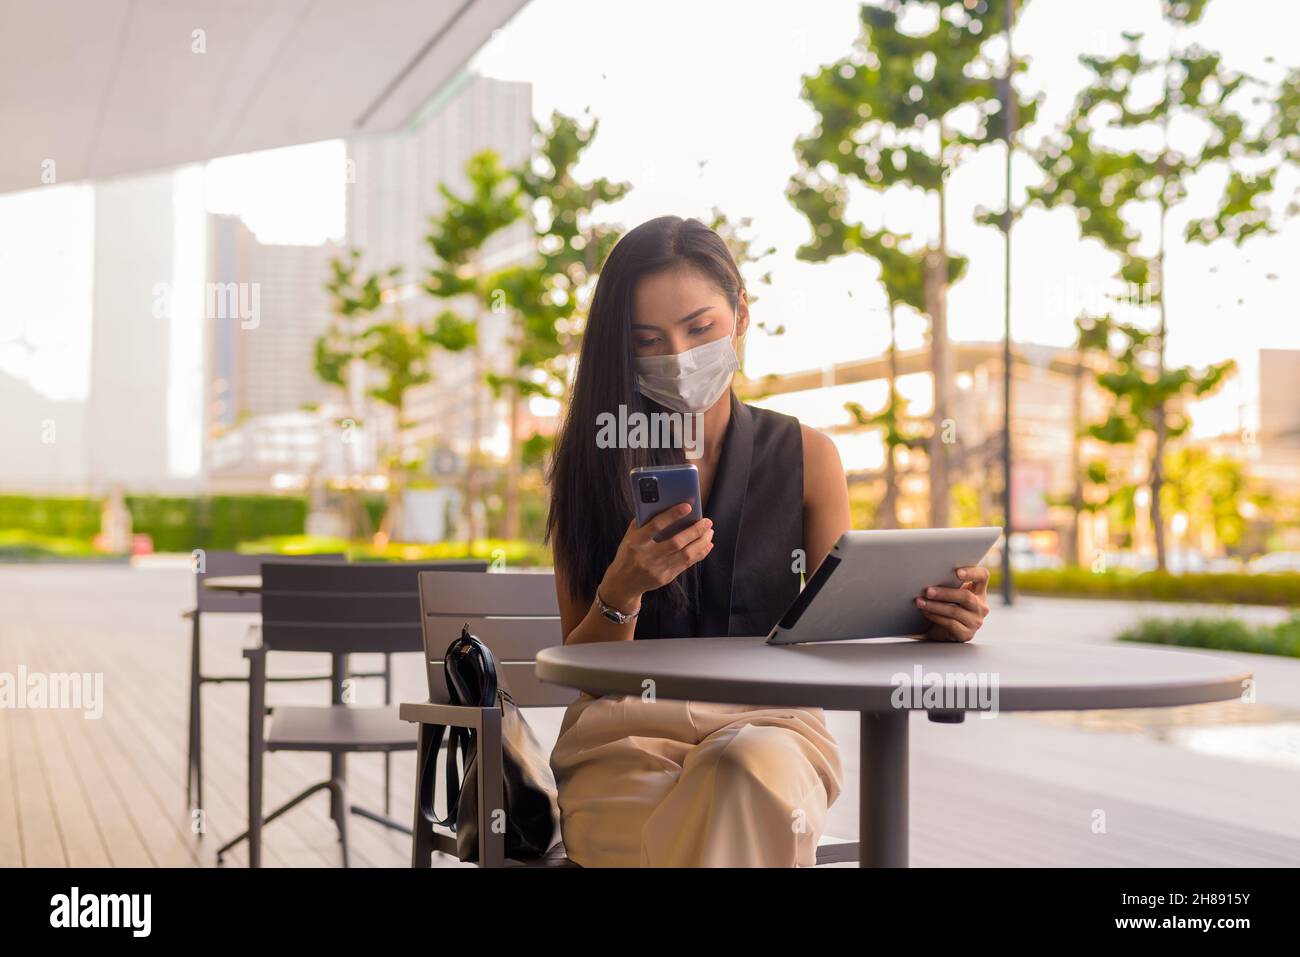 Woman sitting outdoors at coffee shop restaurant social distancing and wearing face mask to protect from covid 19 while using phone and digital tablet Stock Photo